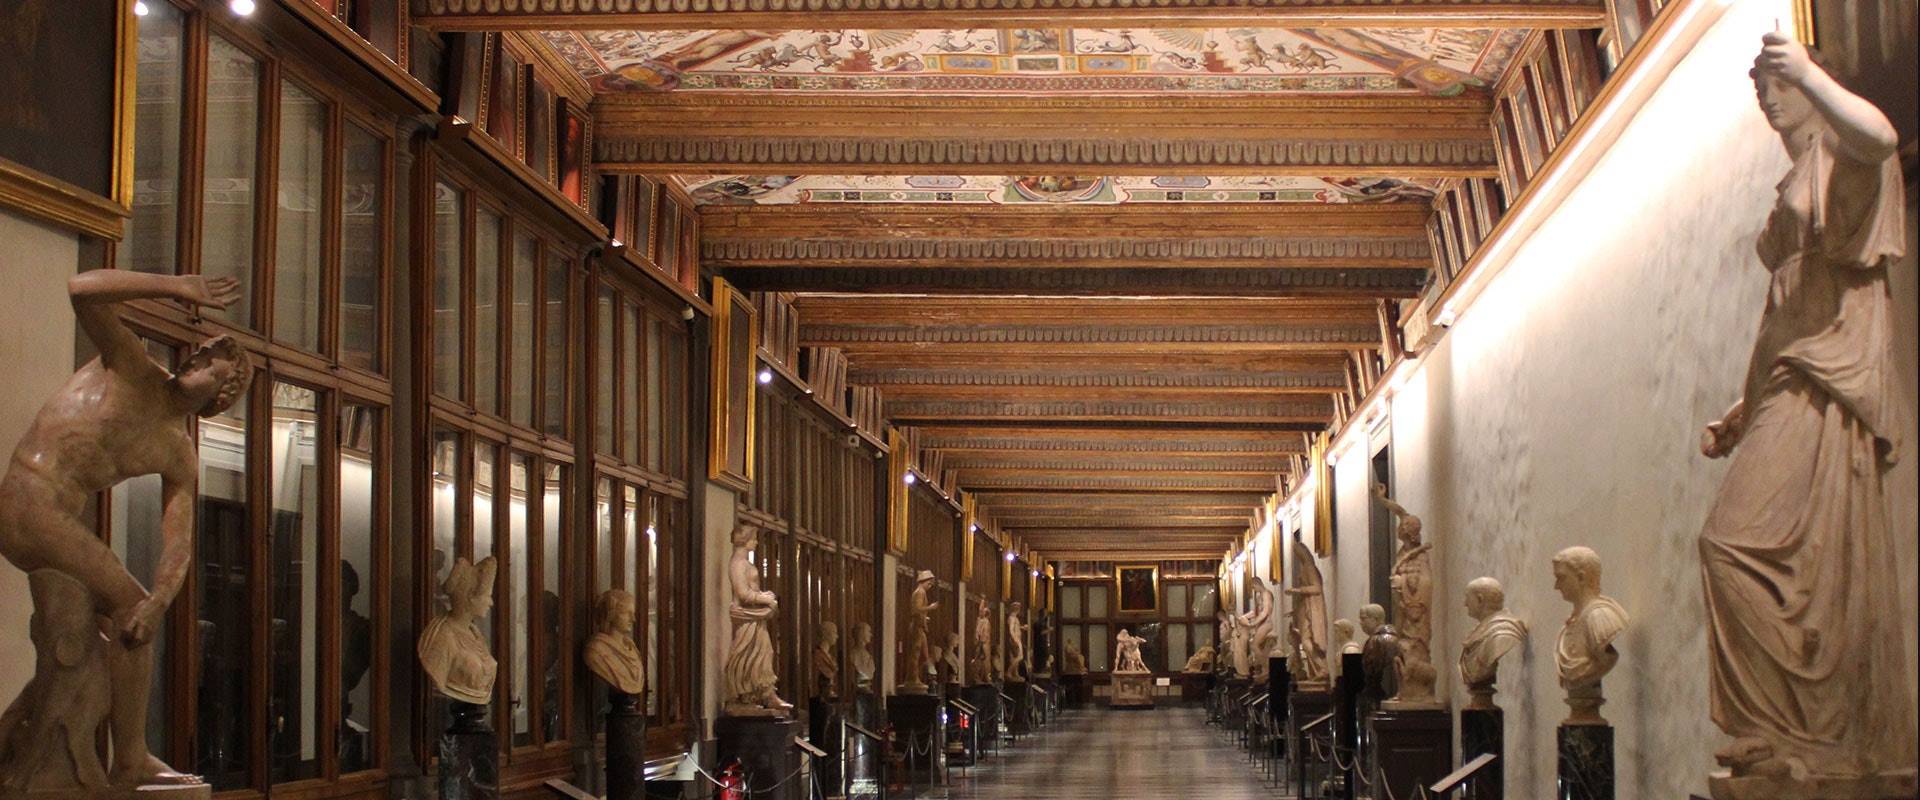 Evening openings of the Uffizi in September